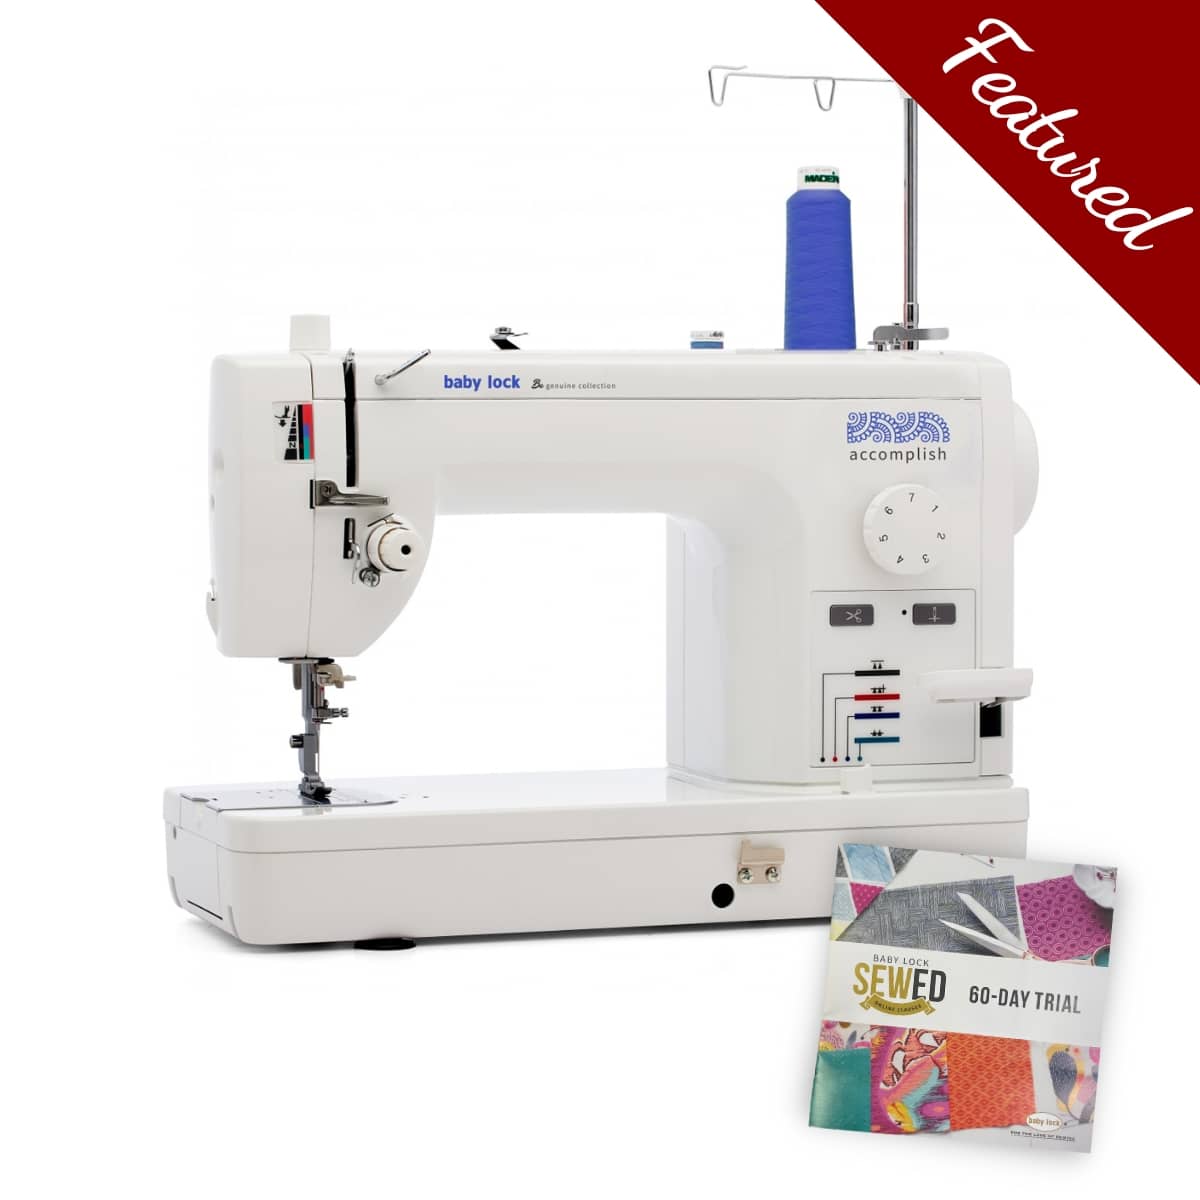 SINGER M1500 Sewing Machine with 6 Built-In Stitches for sale online